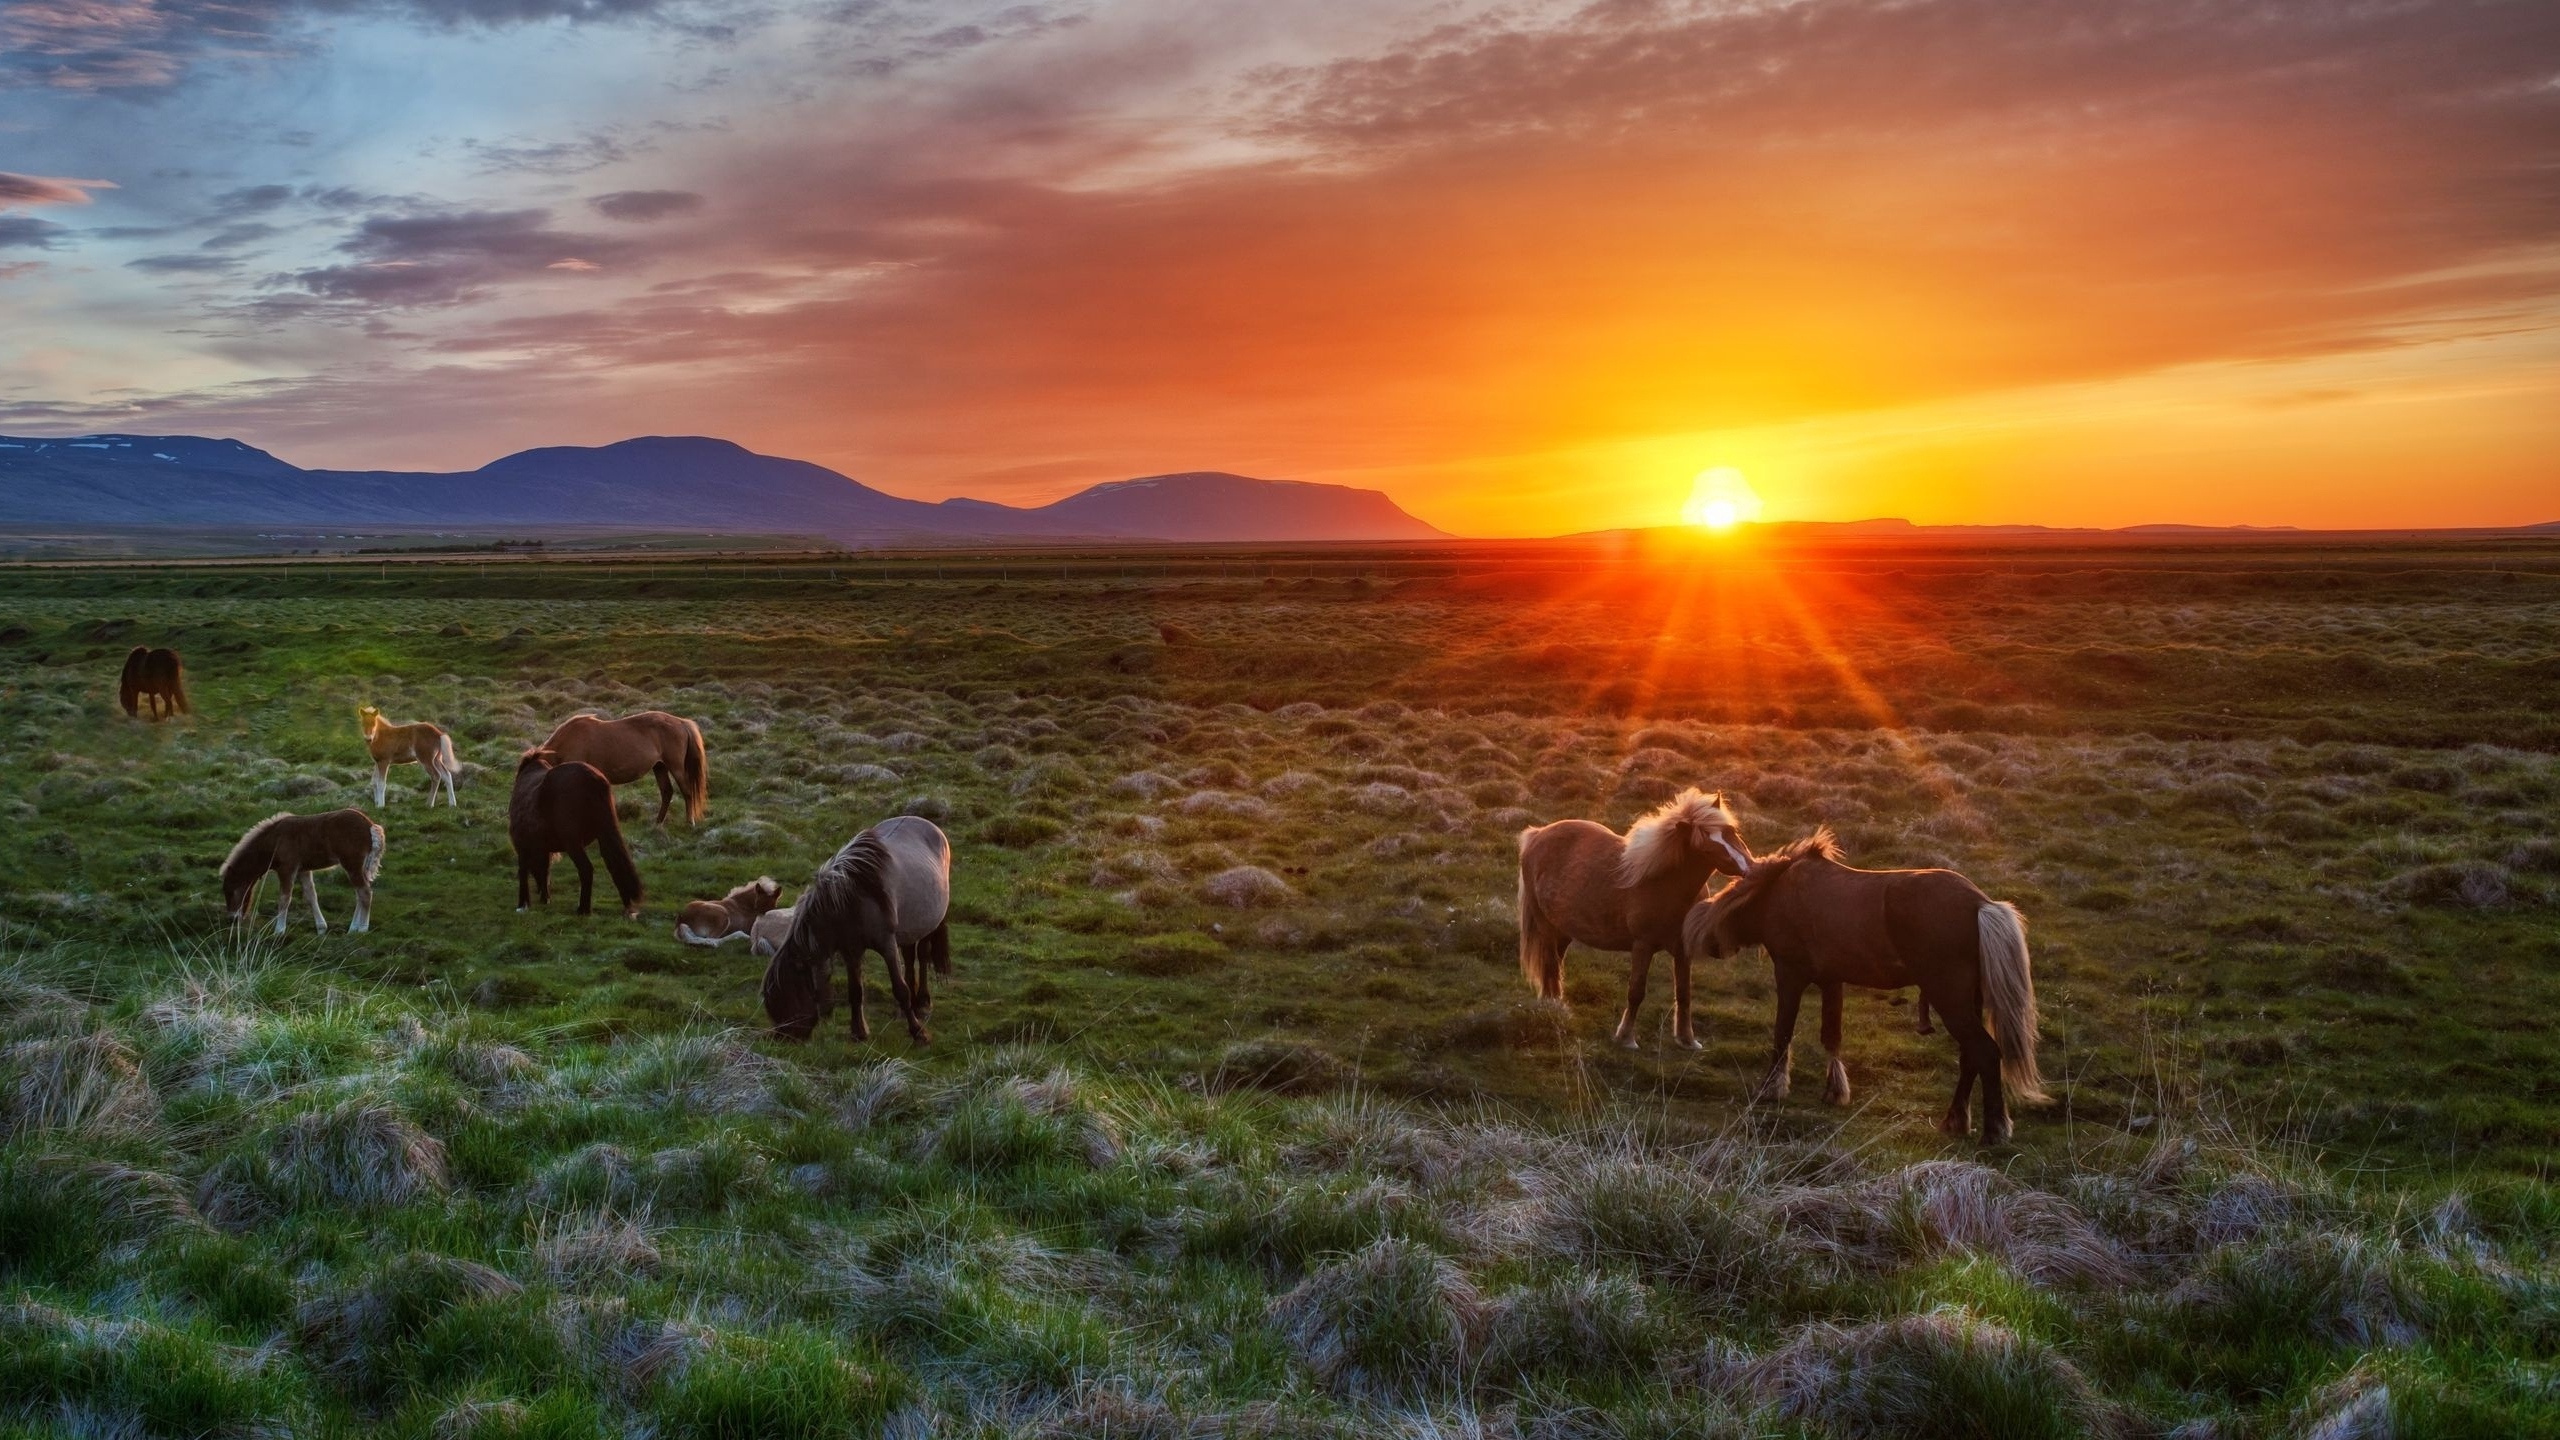 Herd of Horses on Green Grass Field During Sunset. Wallpaper in 2560x1440 Resolution